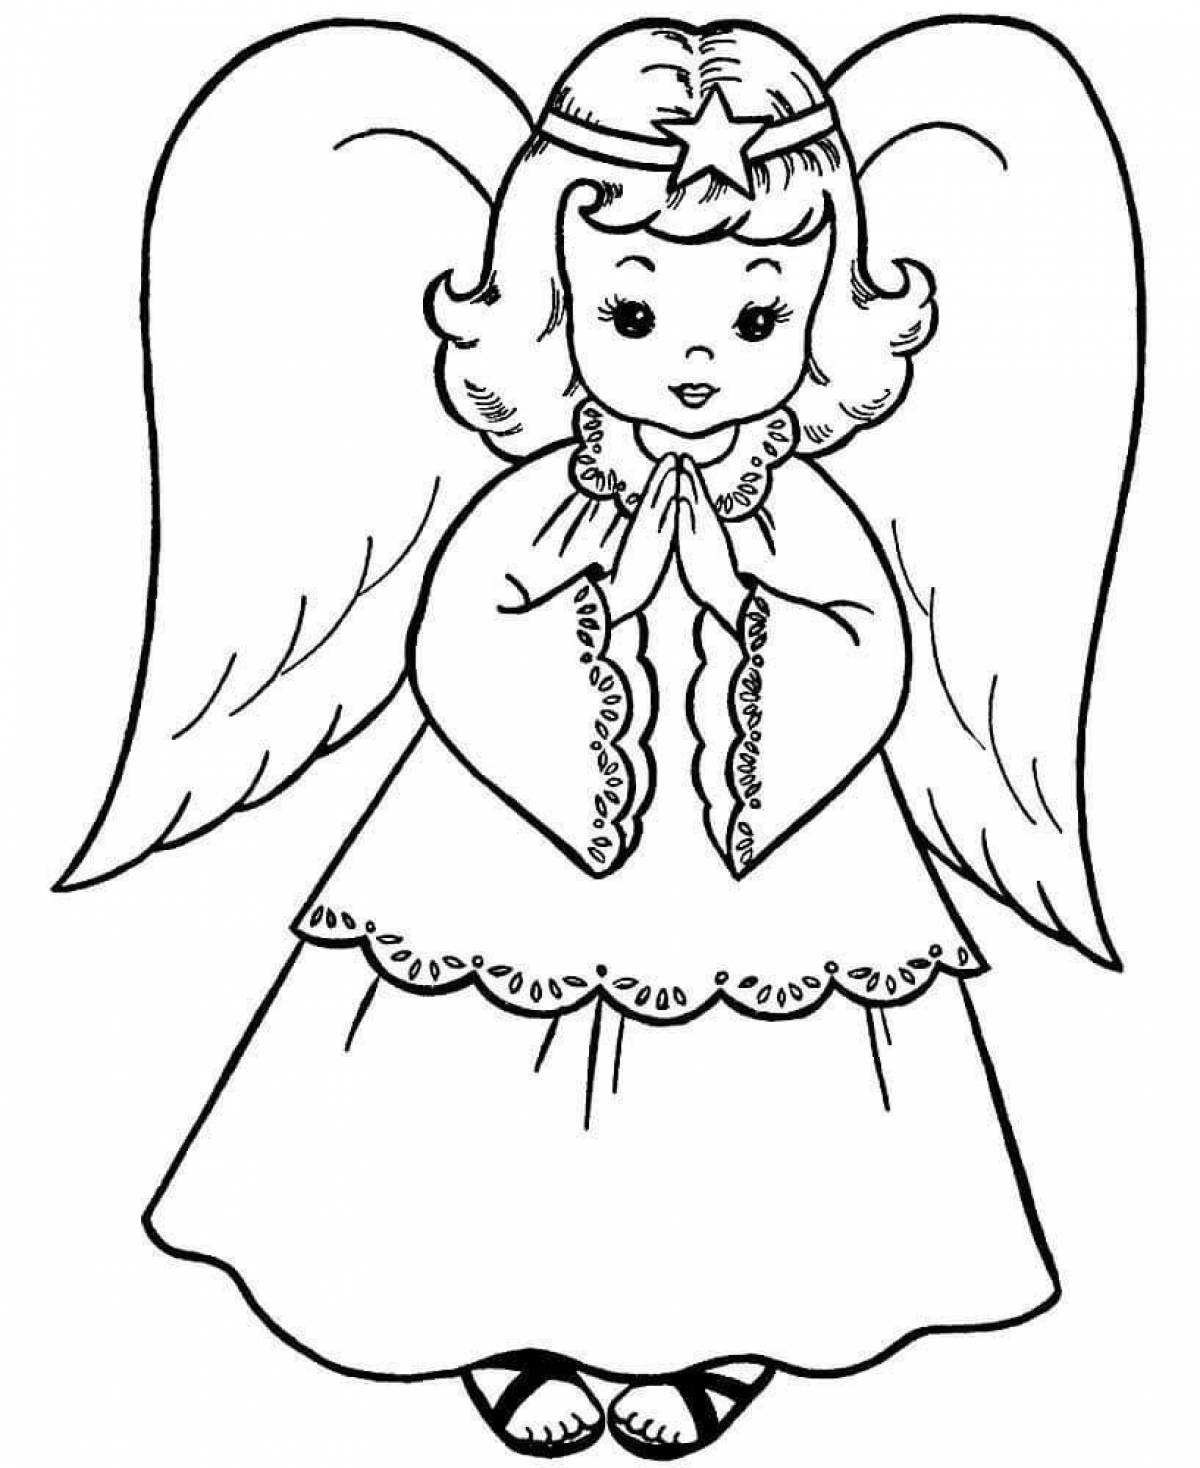 Charming angel girl coloring book